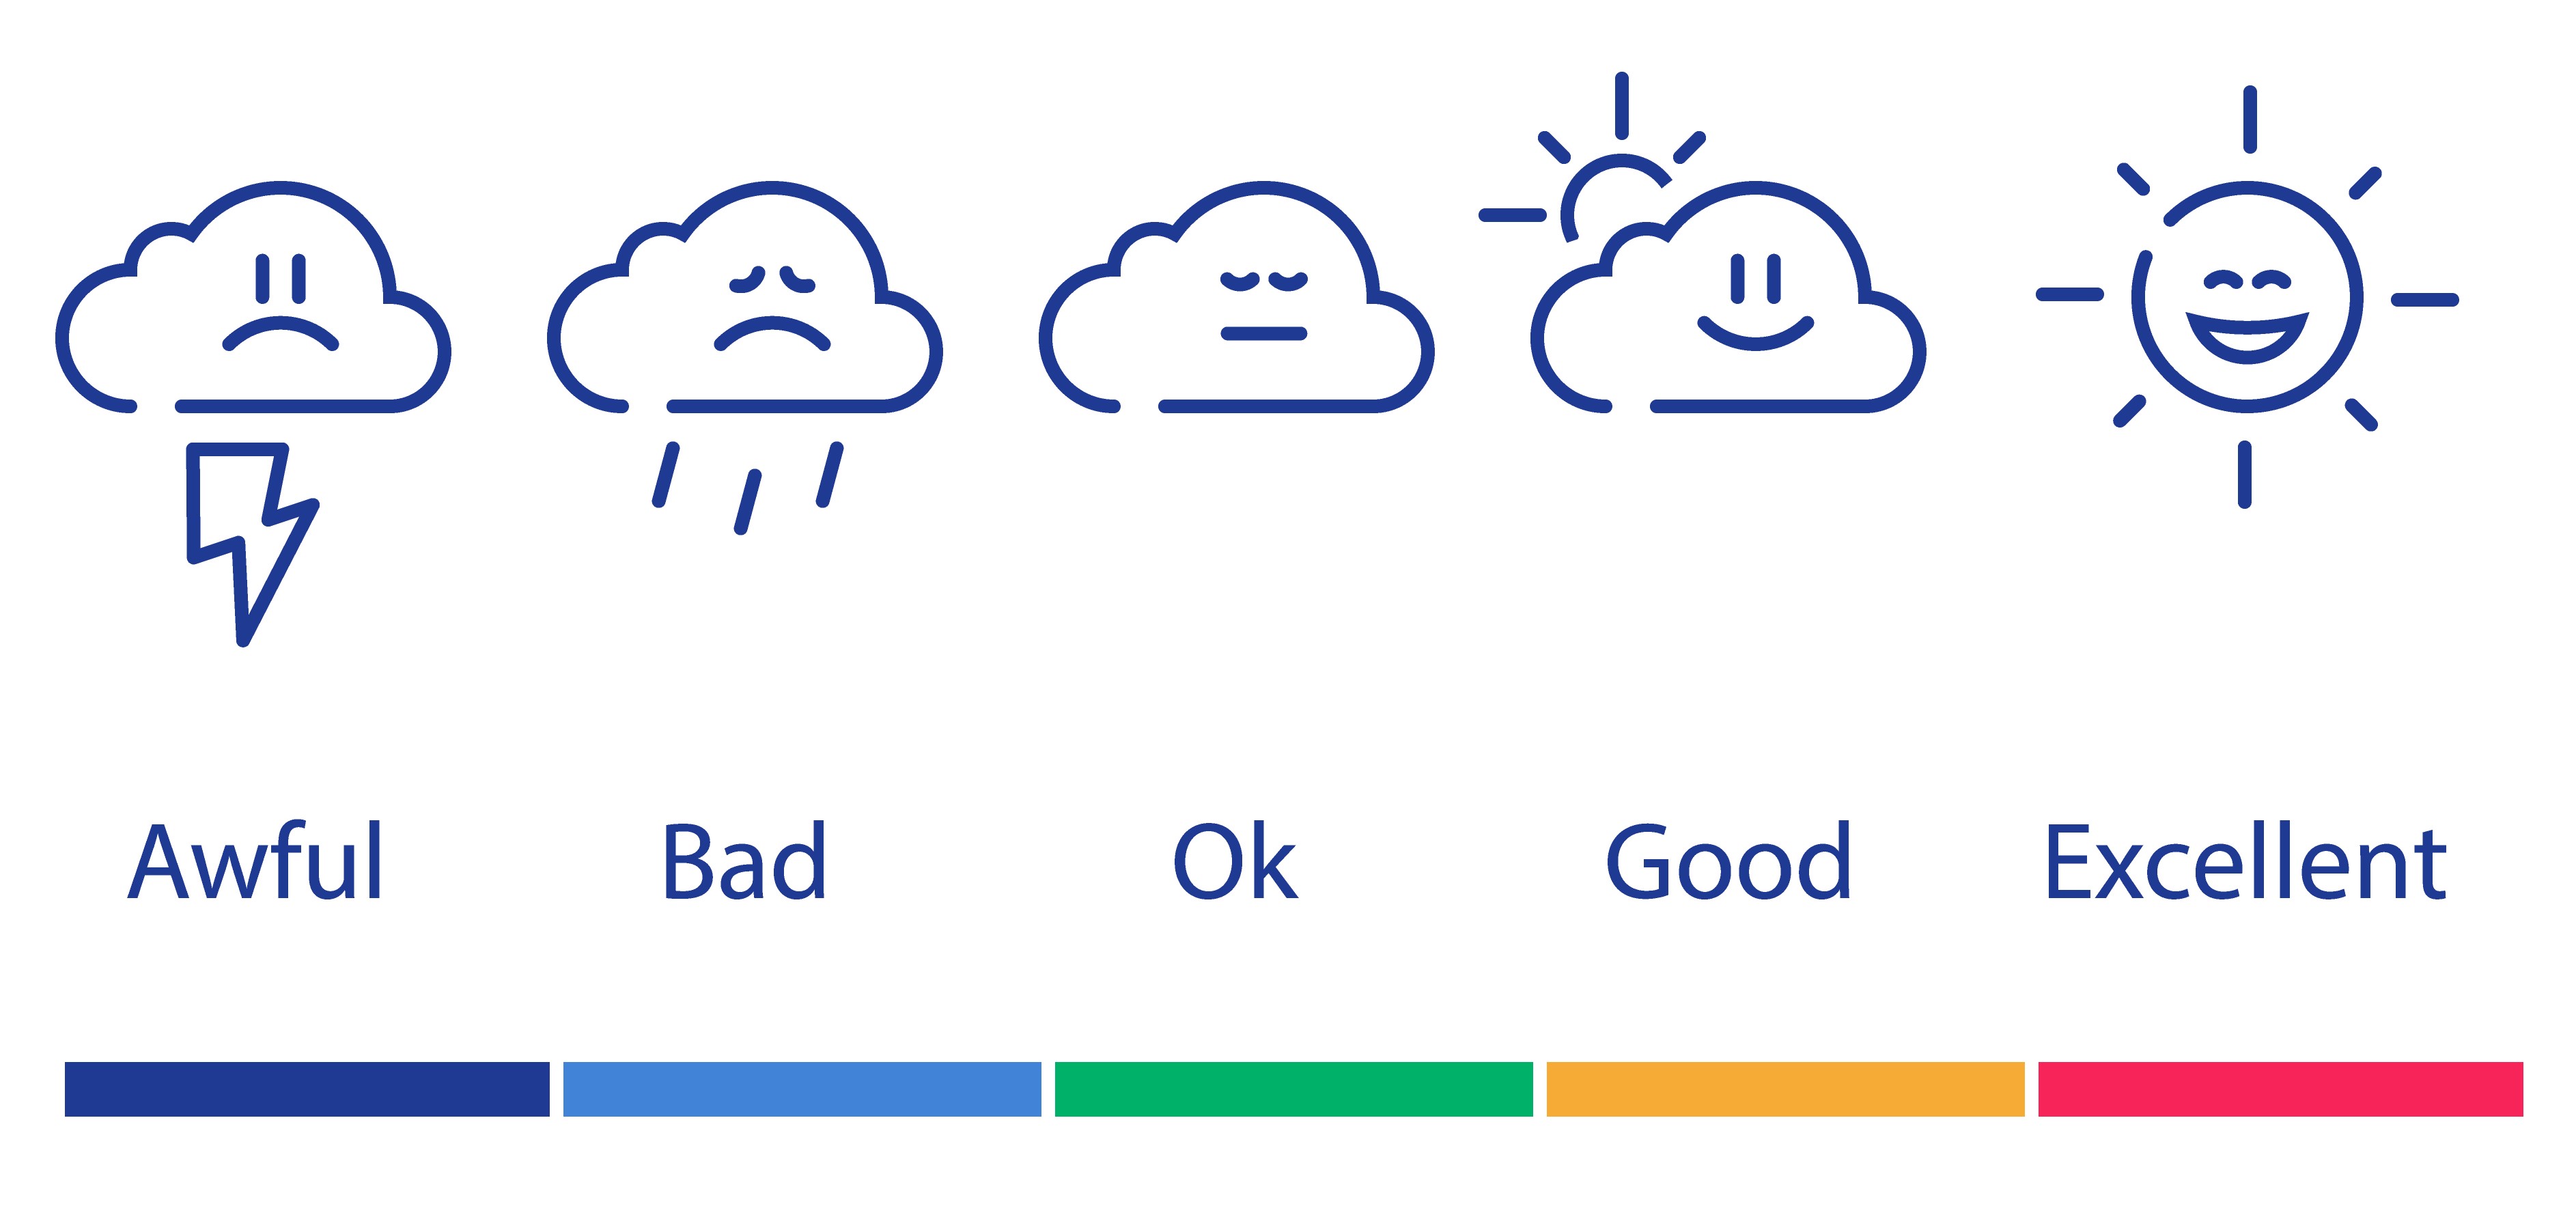 Weather icons linked to feelings, from awful to excellent